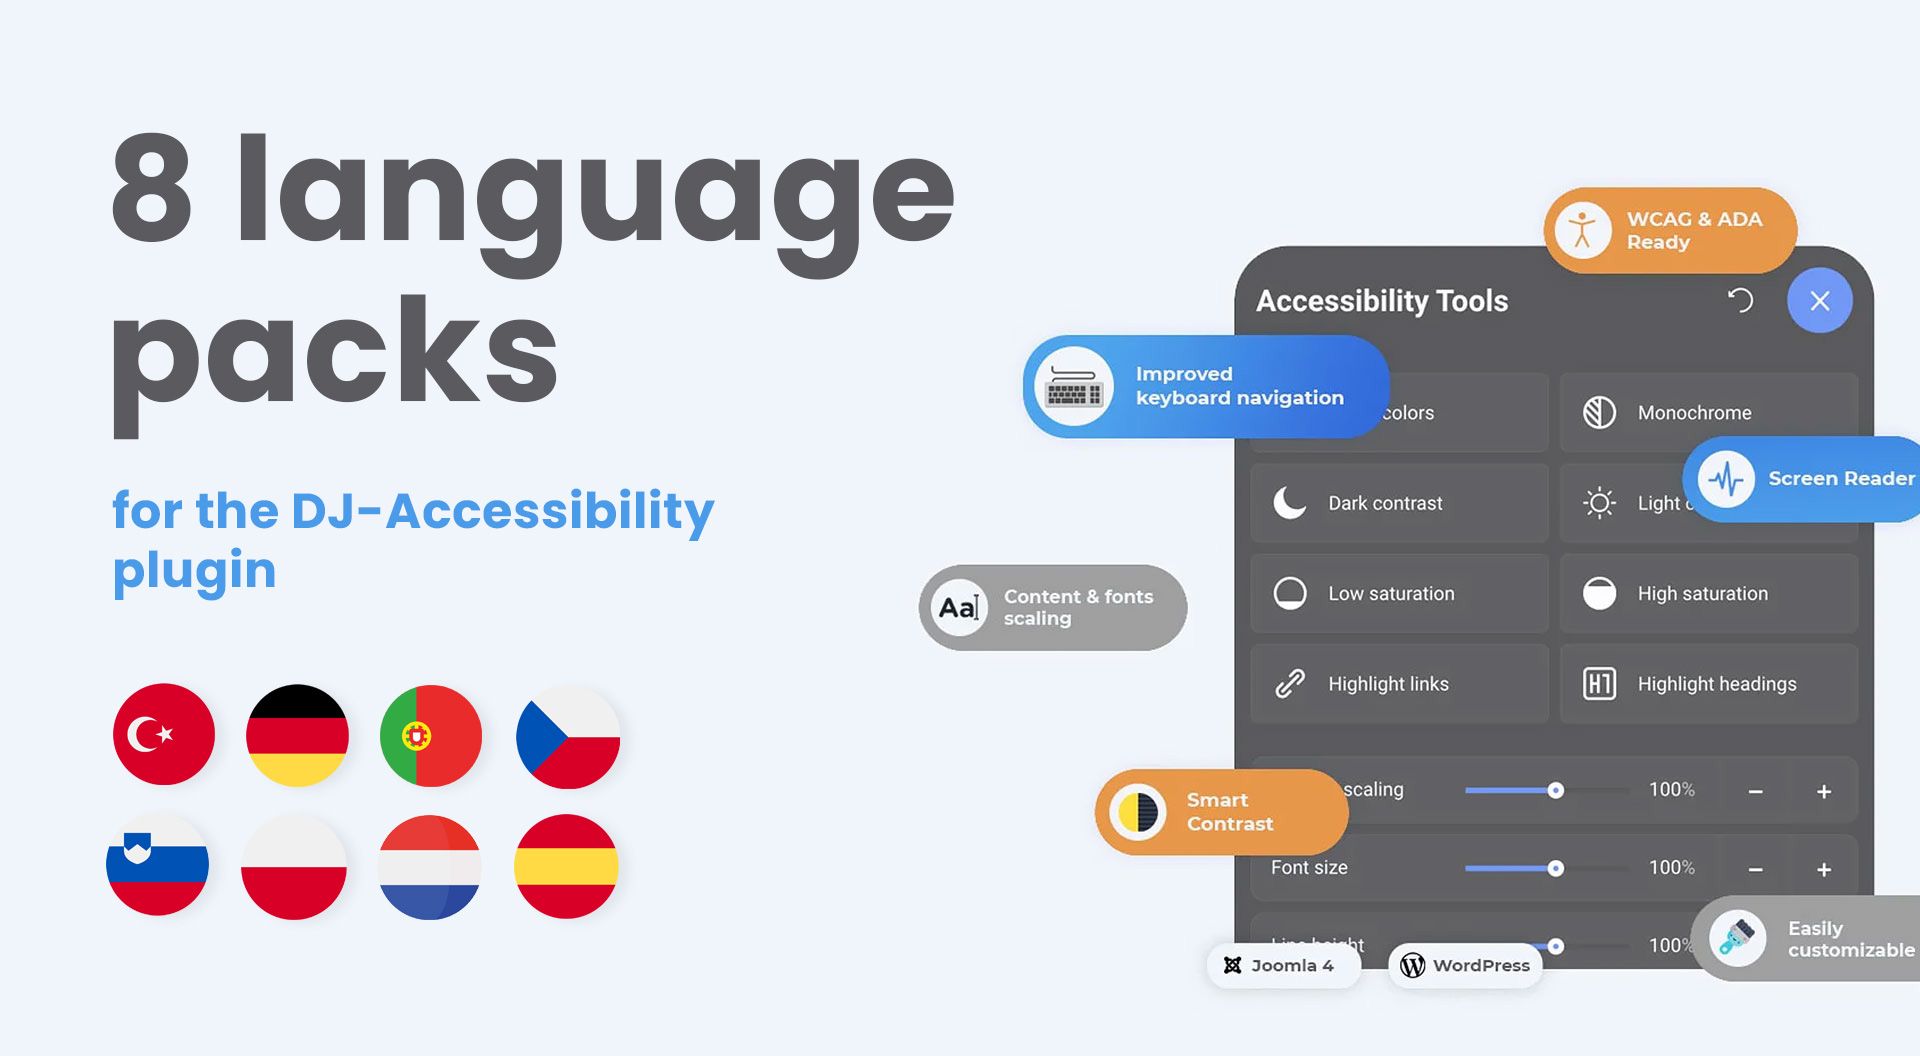 8 language packs included in the DJ-Accessibility plugin